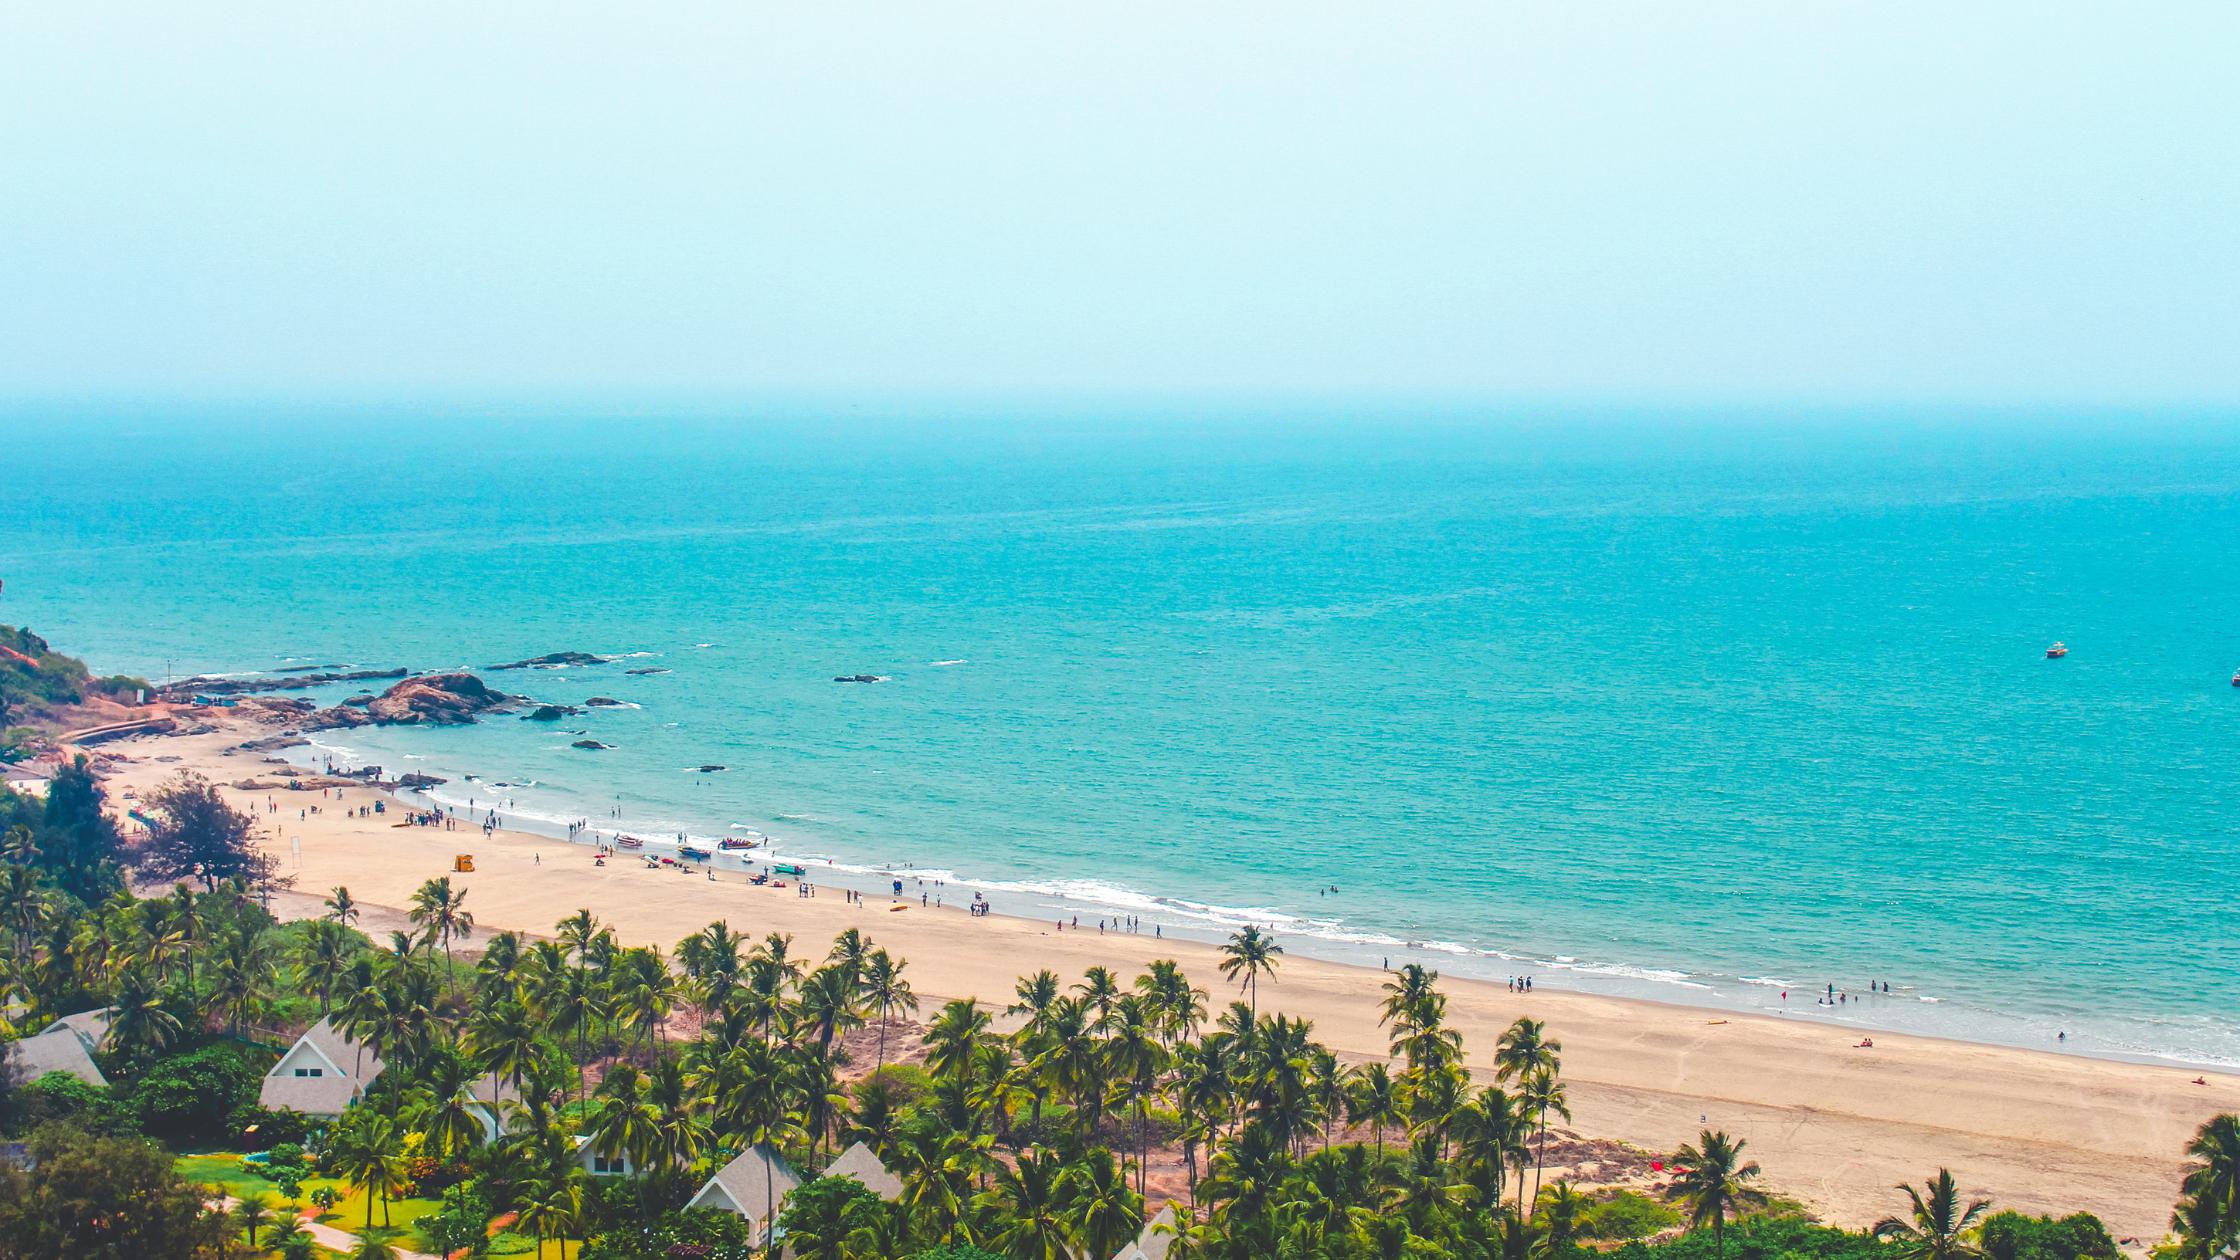 Goa Holiday Packages online, Best deals for Goa Holidays, Group discounts for Goa Holidays